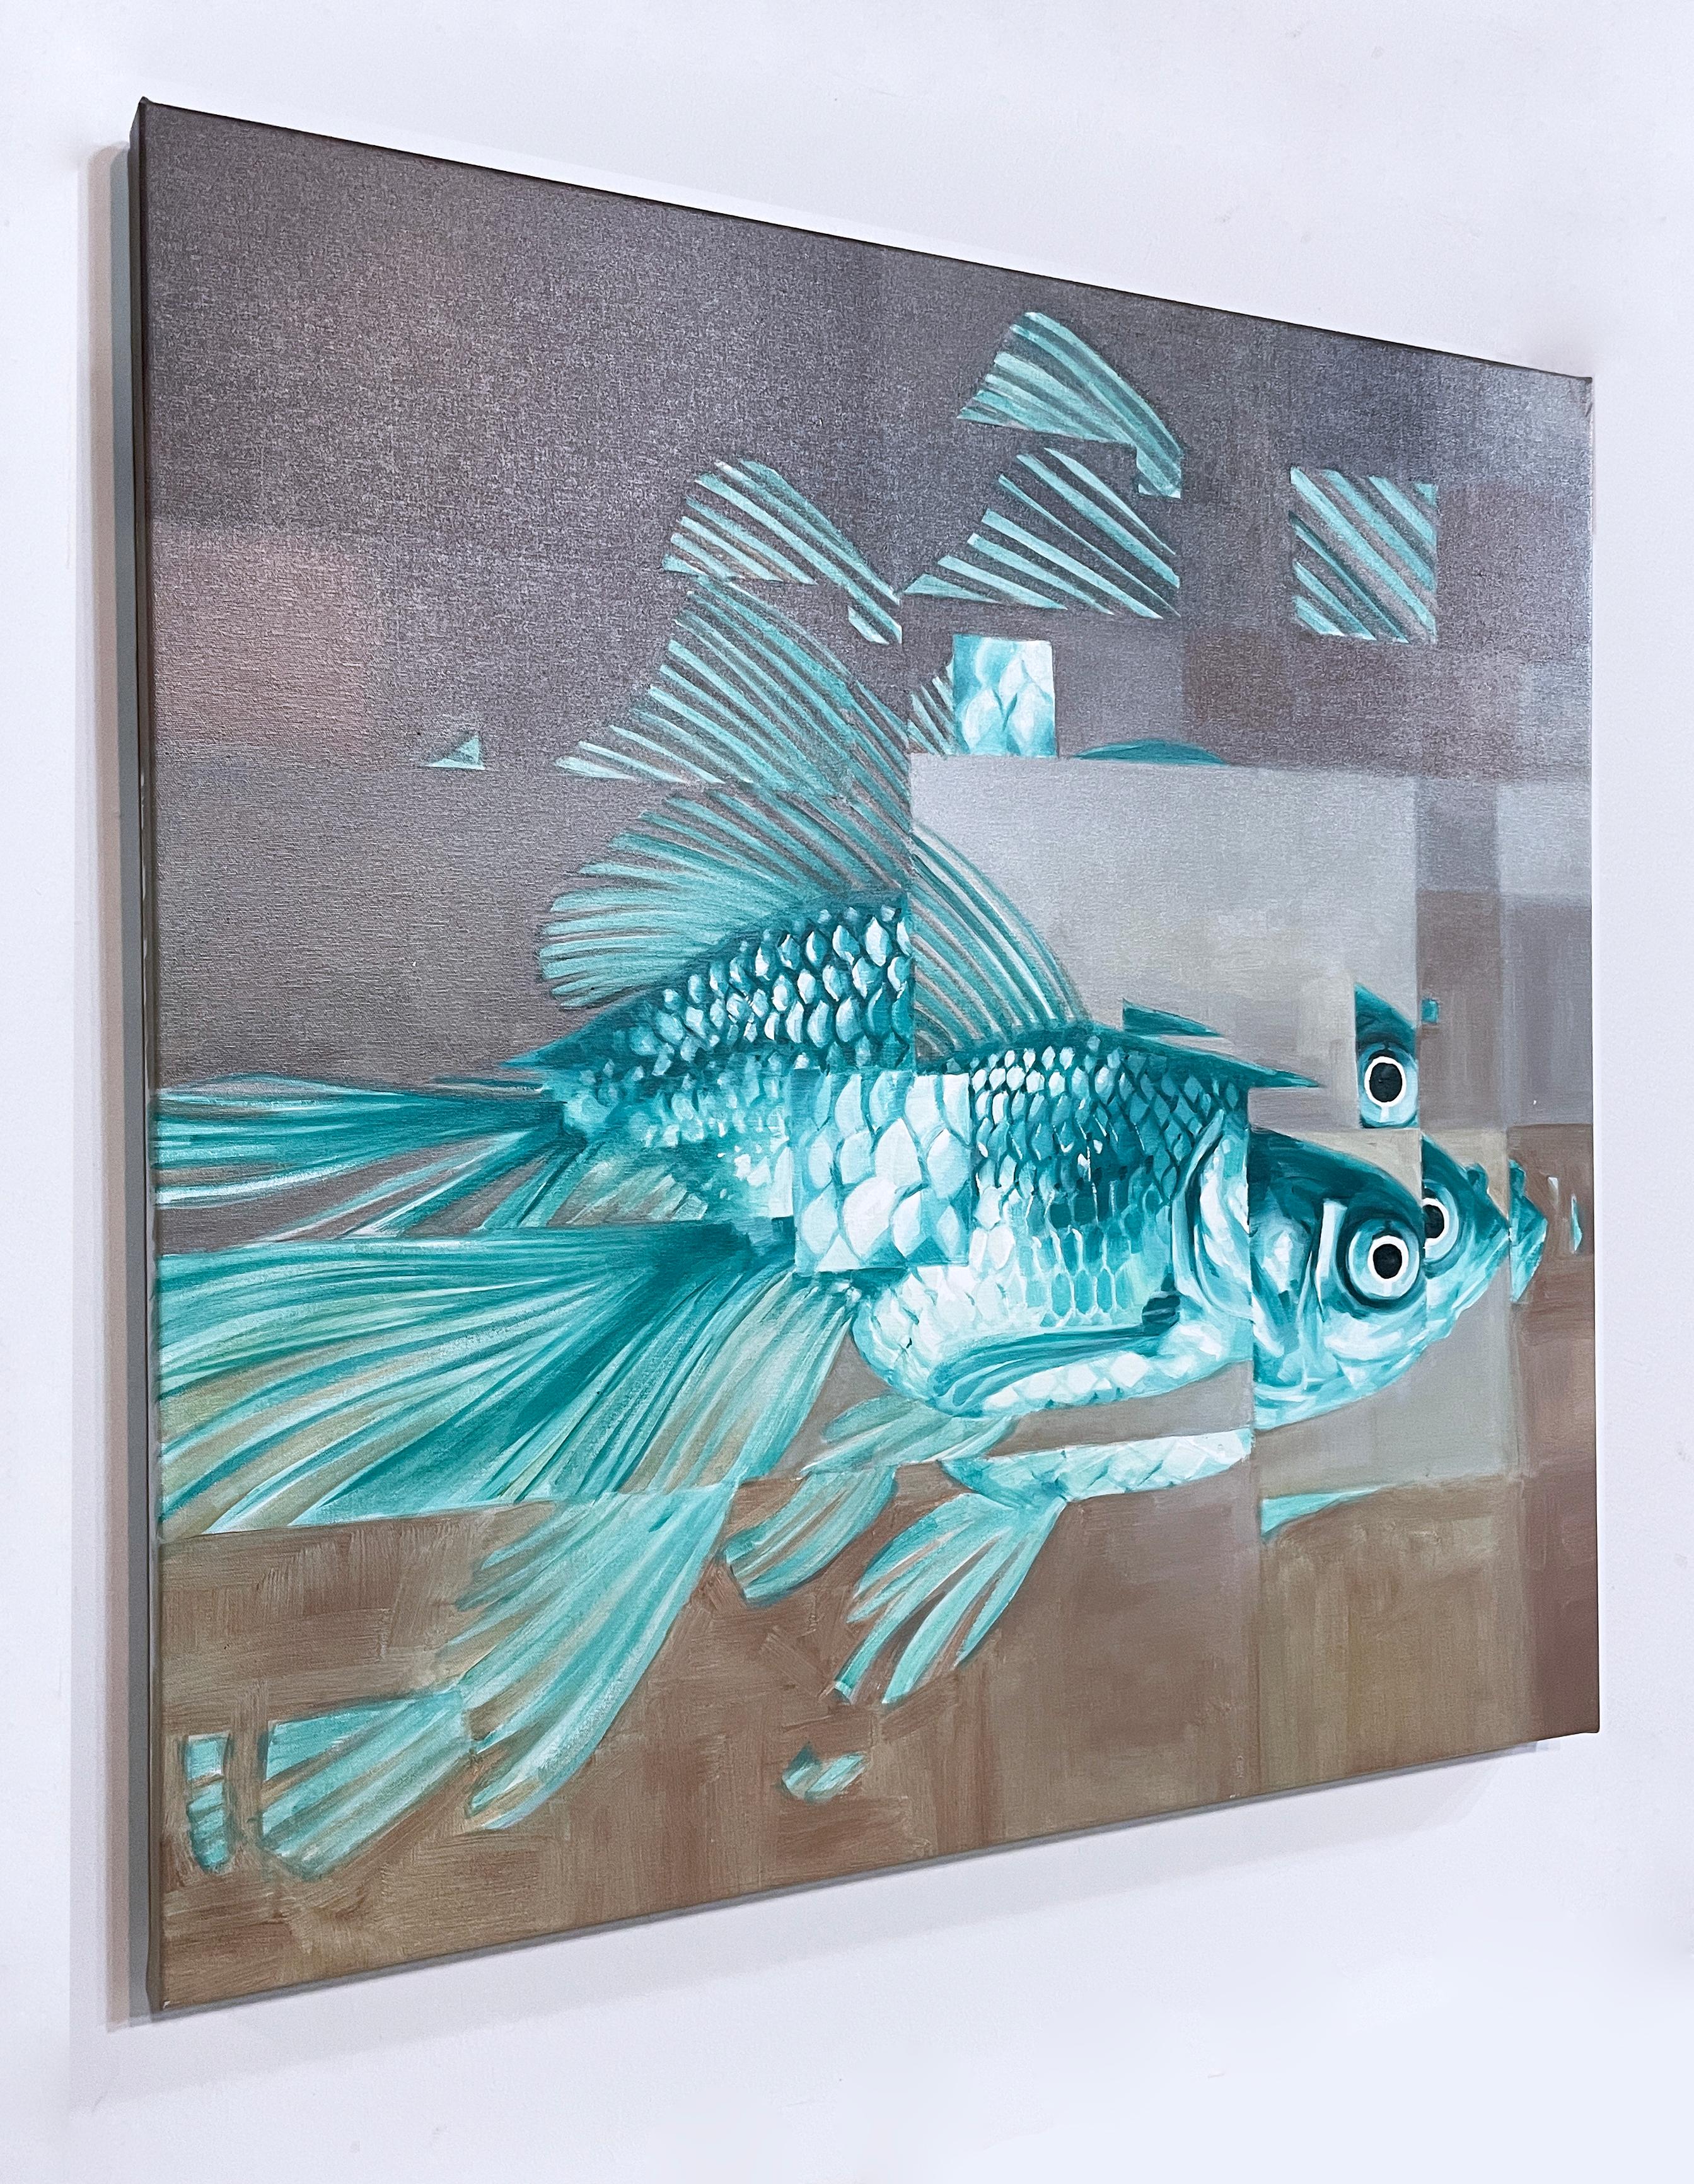 Big Fish Too (2022) oil on canvas, gray, pewter, blue, pixels, water, goldfish - Gray Figurative Painting by RU8ICON1